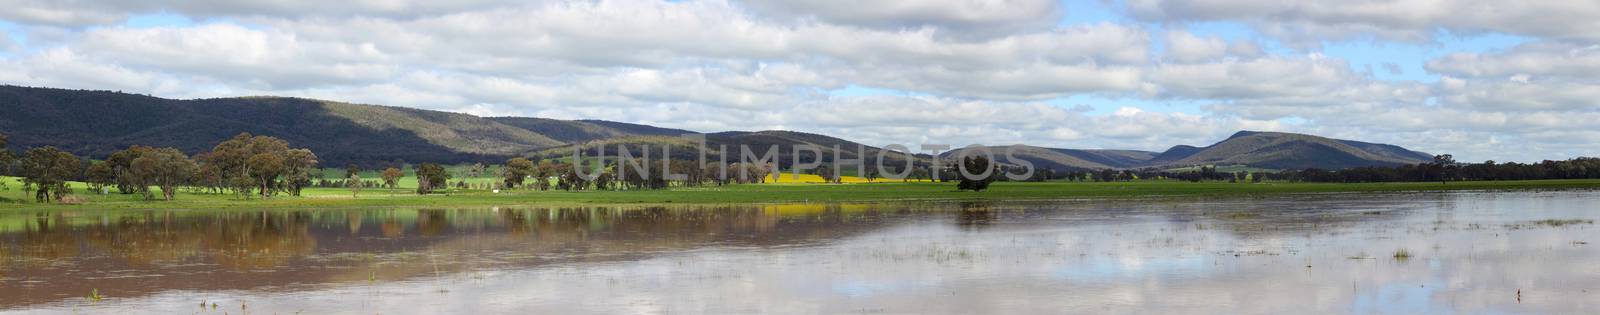 Flooding in Crowther, Central West NSW Australia by lovleah